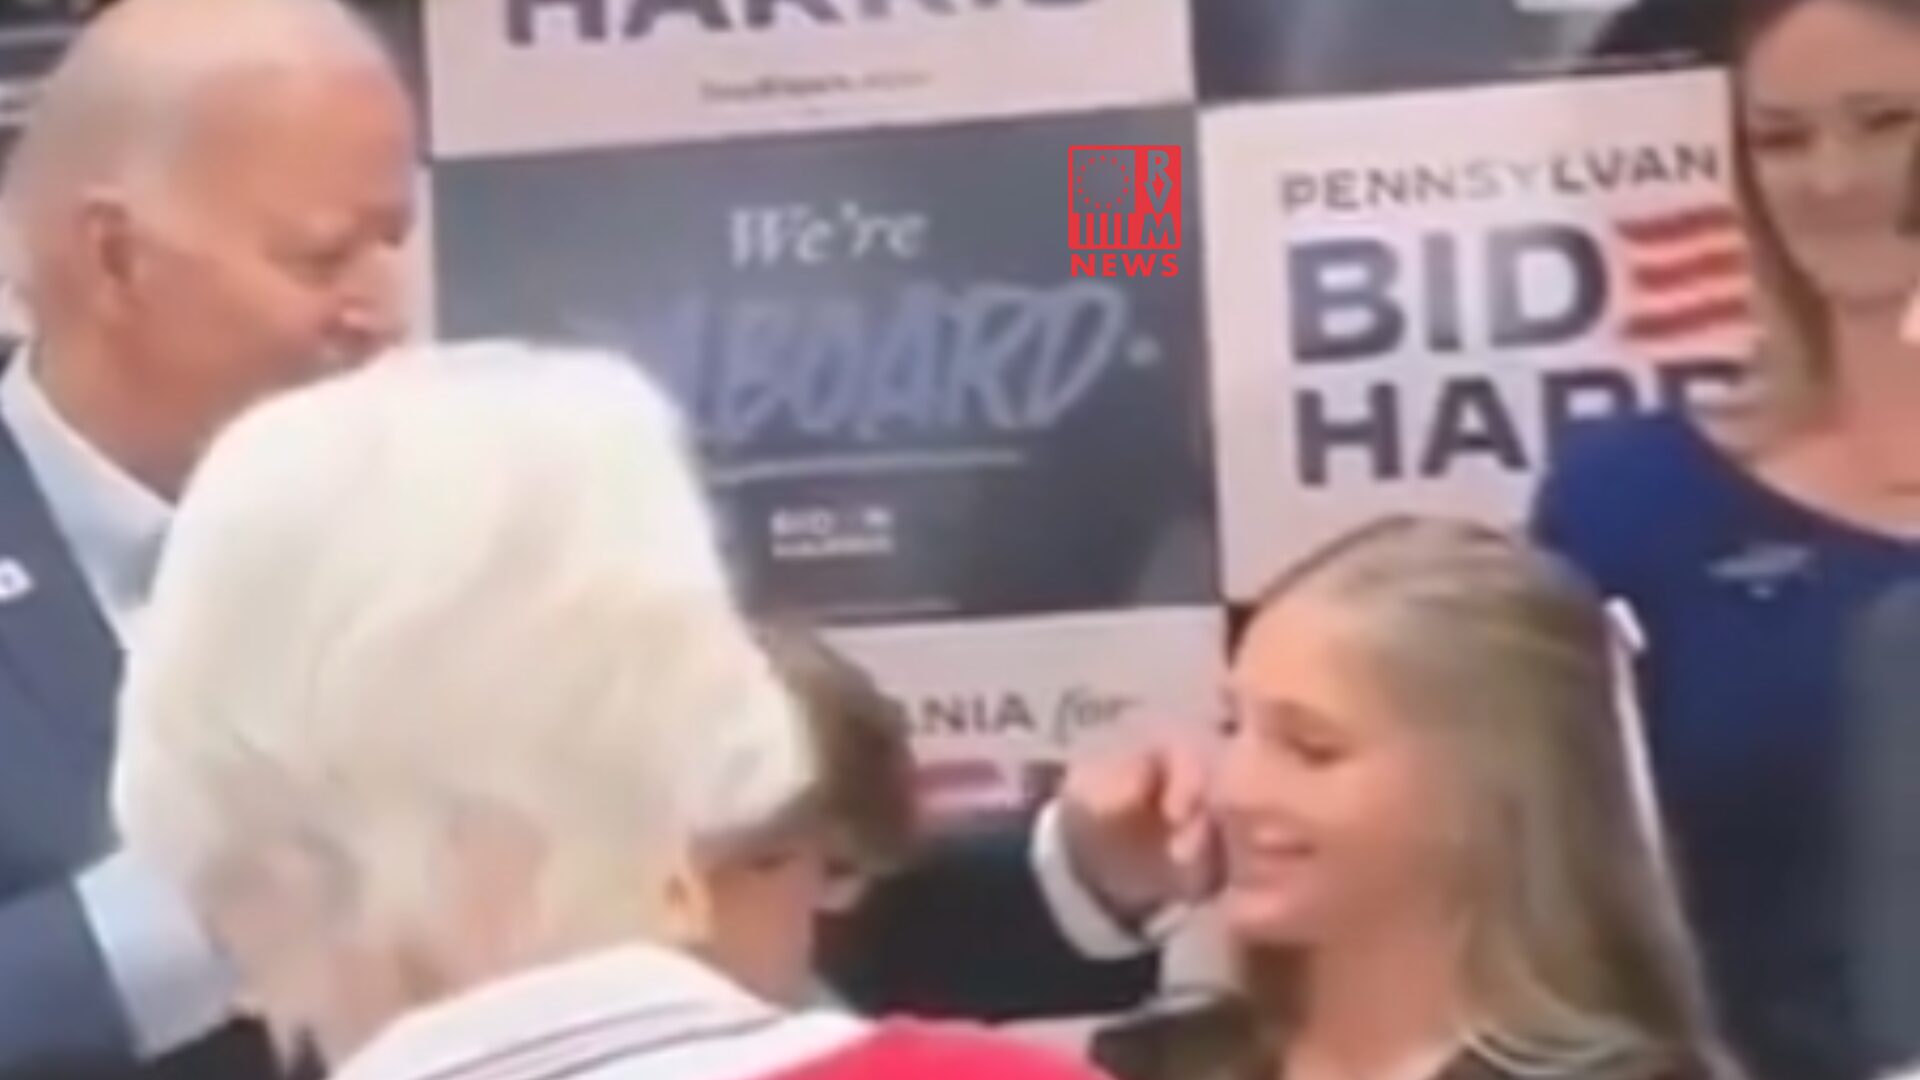 Joe Biden BUSTED On Live TV Inappropriately Touching A Young Girl [VIDEO]